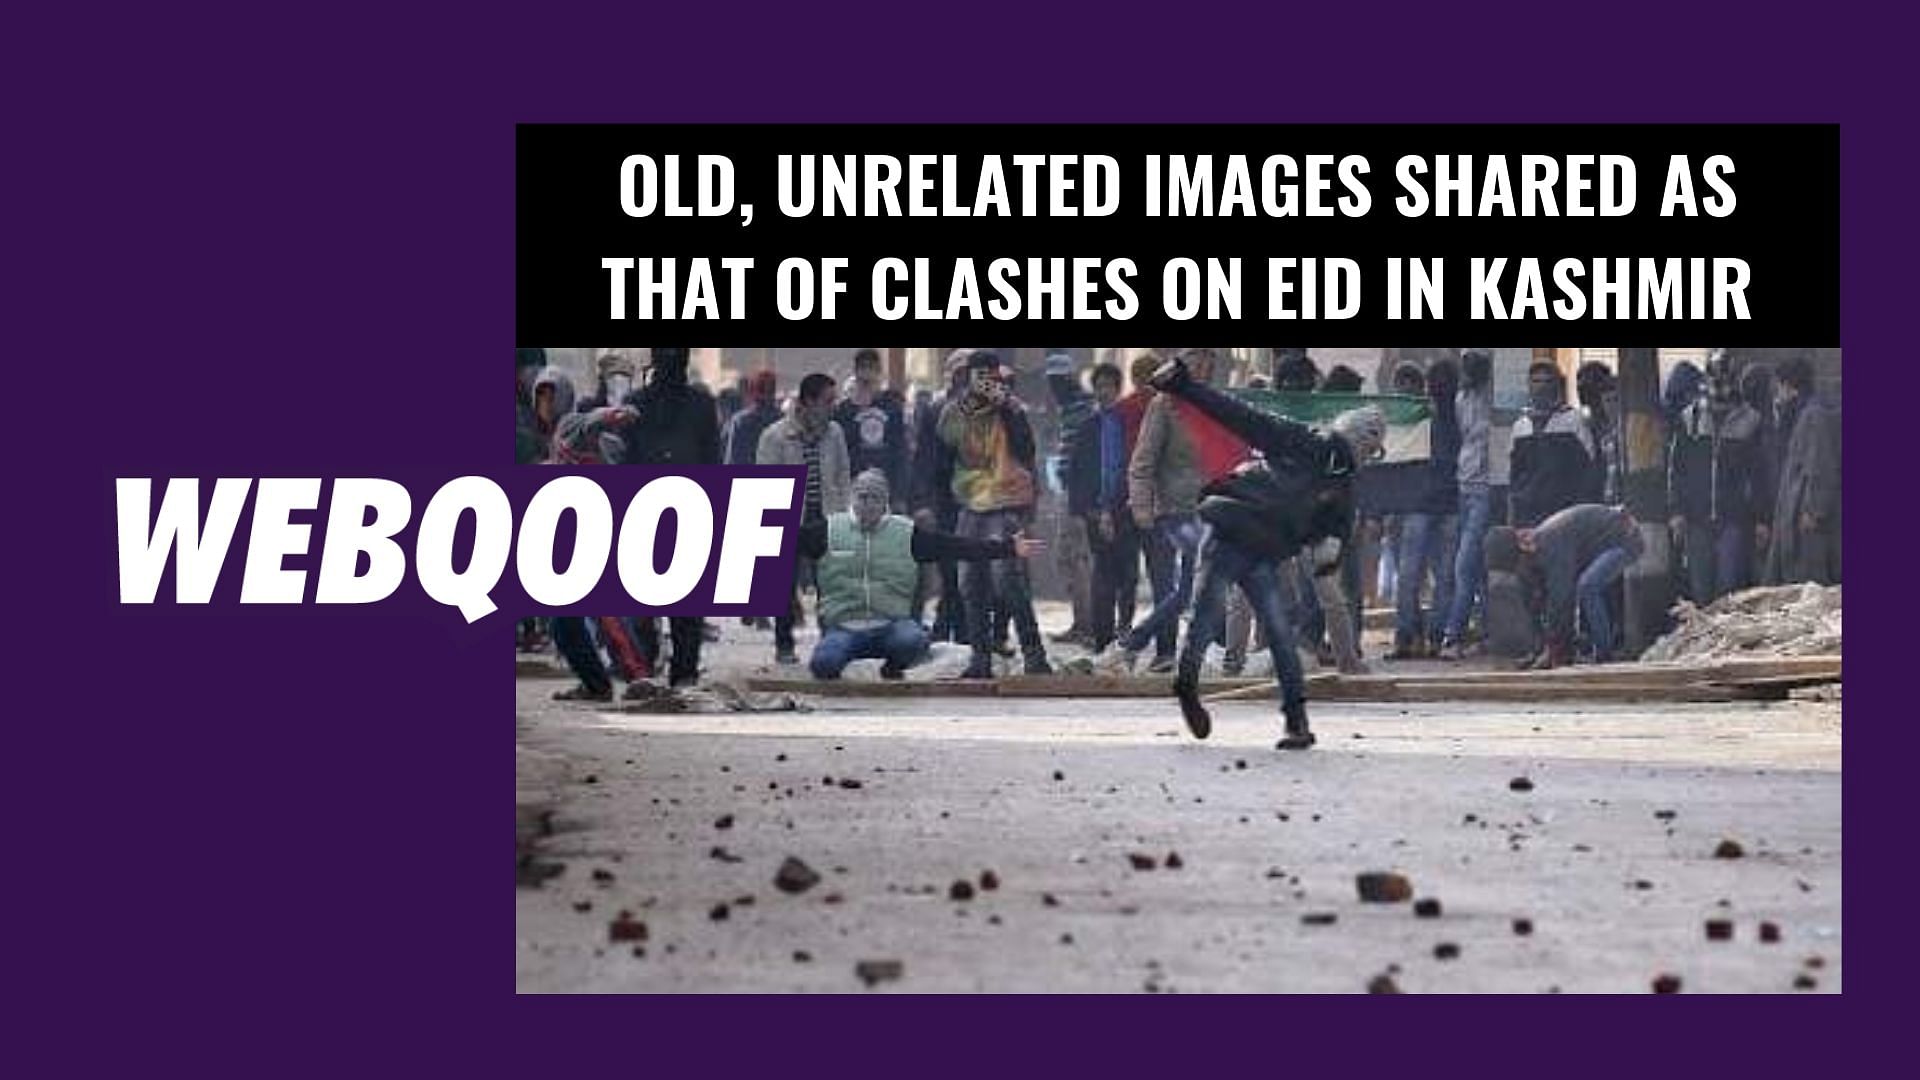 Though clashes and stone pelting did take place in Srinagar on 5 June after Eid prayers, the images being shared in the viral message are old and that of unrelated incidents.